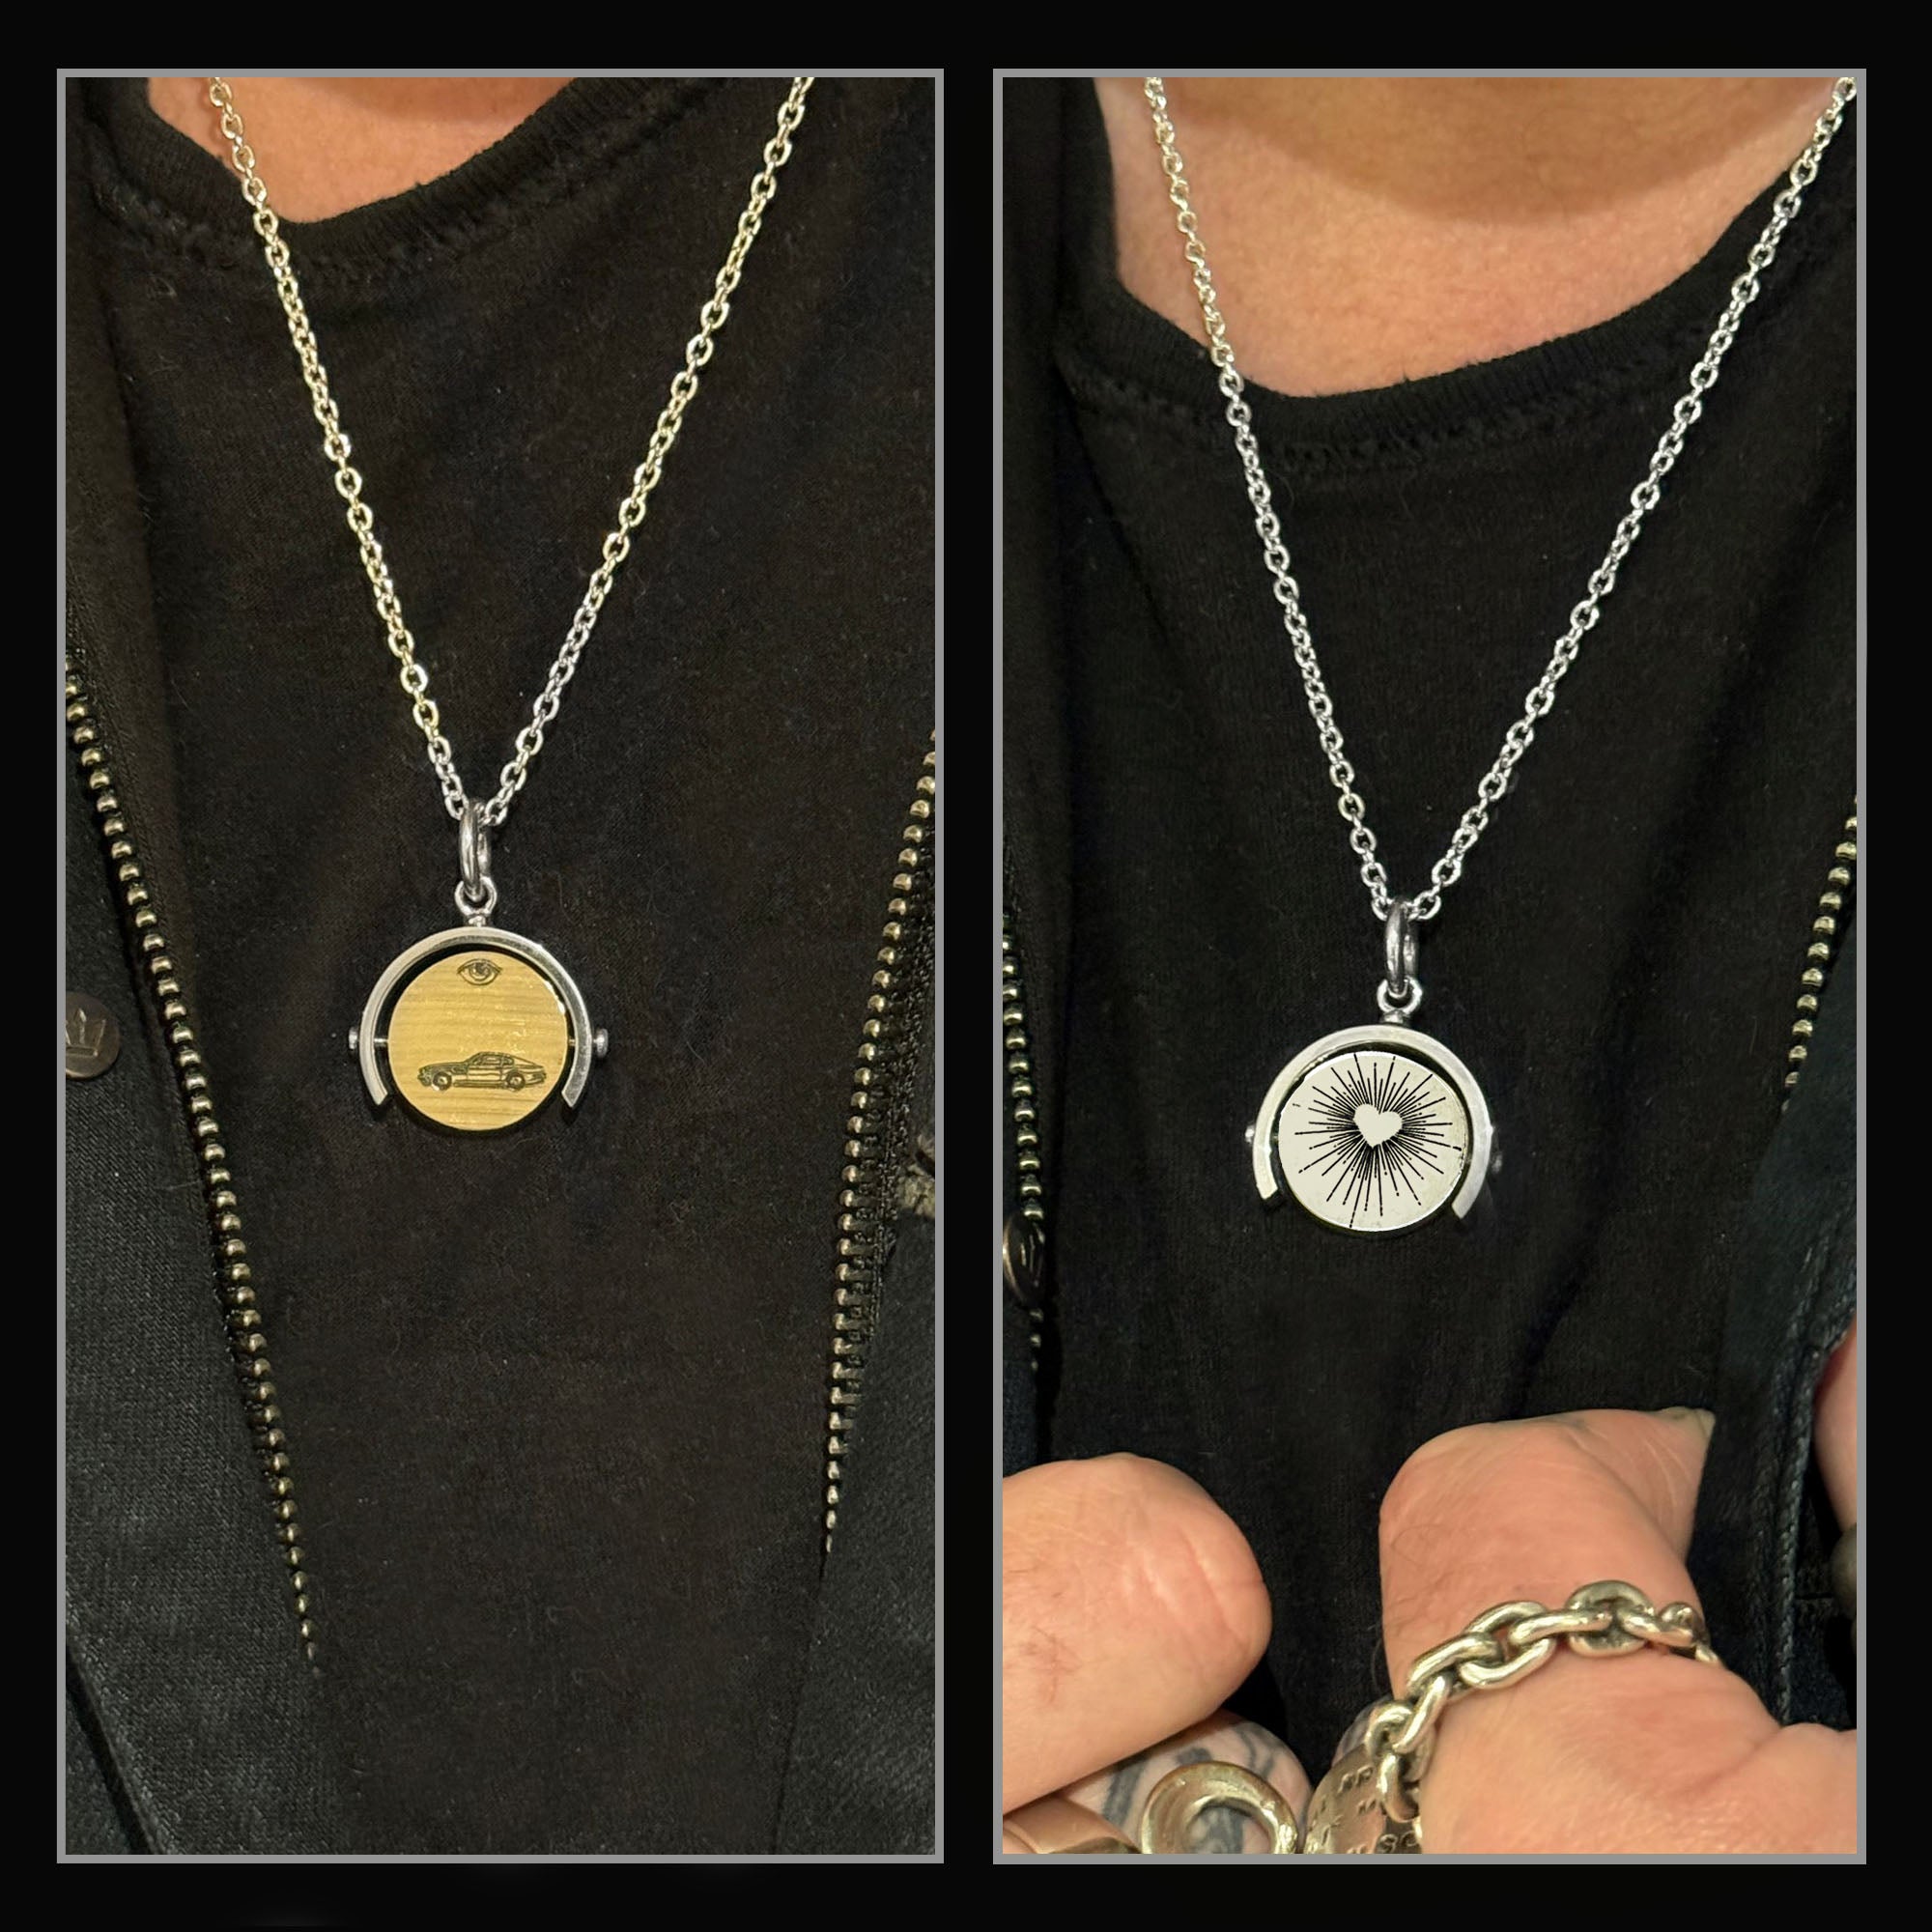 Roger Taylor - Taylored 'Car' Spinner Pendant